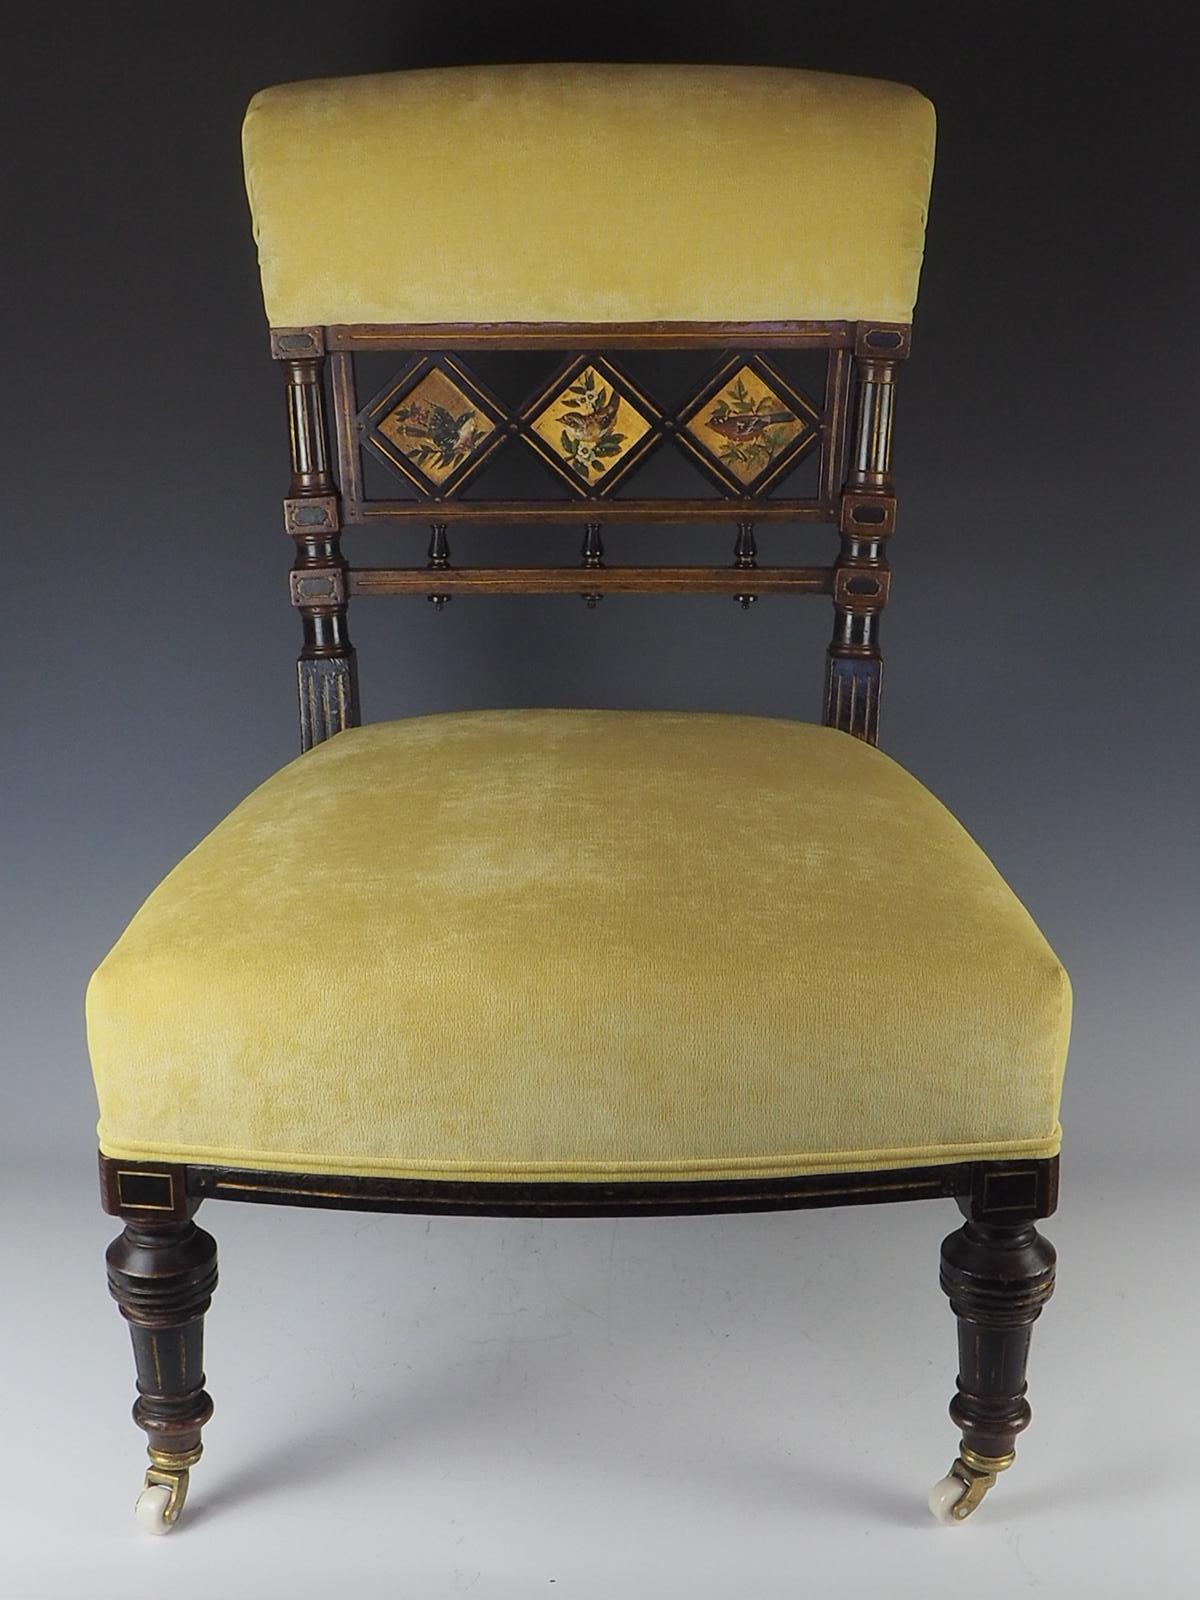 c.1870 Aesthetic Movement Ebonised and gilt side chair with hand painted birds

One of the most beautiful side chairs with hand painted birds
The chair has been luxiously reupholstred using crushed velvet that was simalar to the farbric